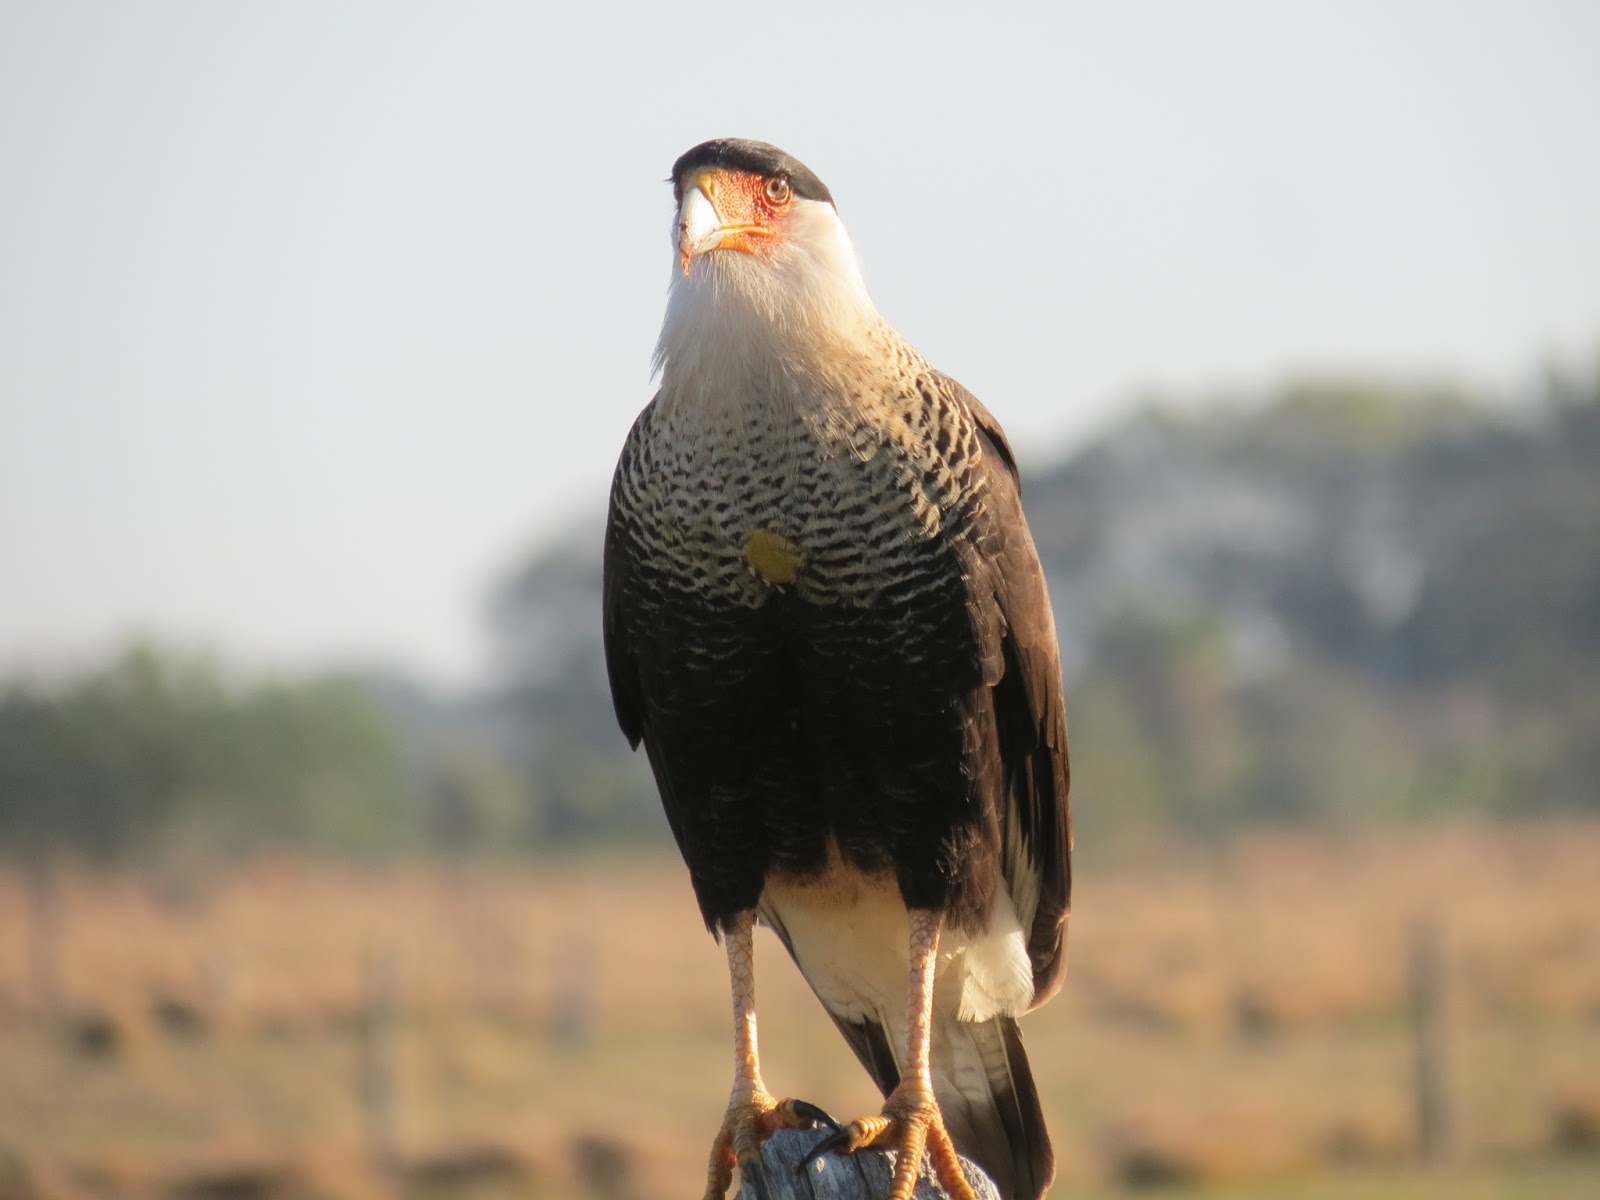 Viewing nature with Eileen: Crested Caracara